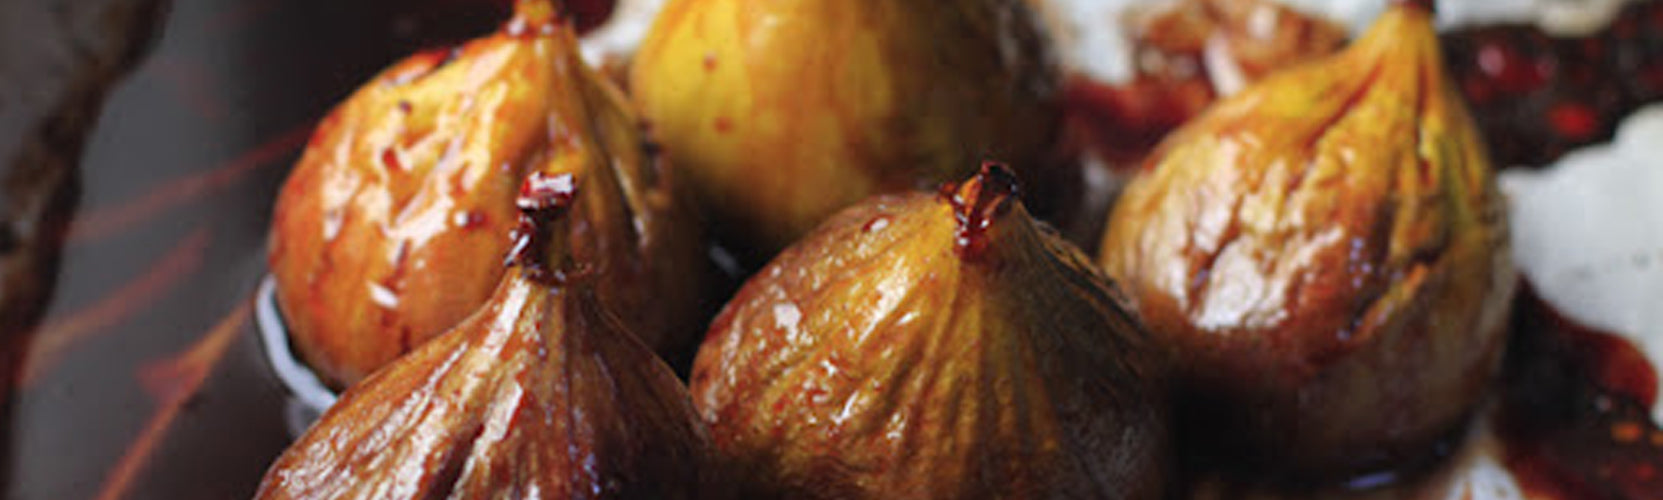 Baked Figs In Port With Caramelised Almonds